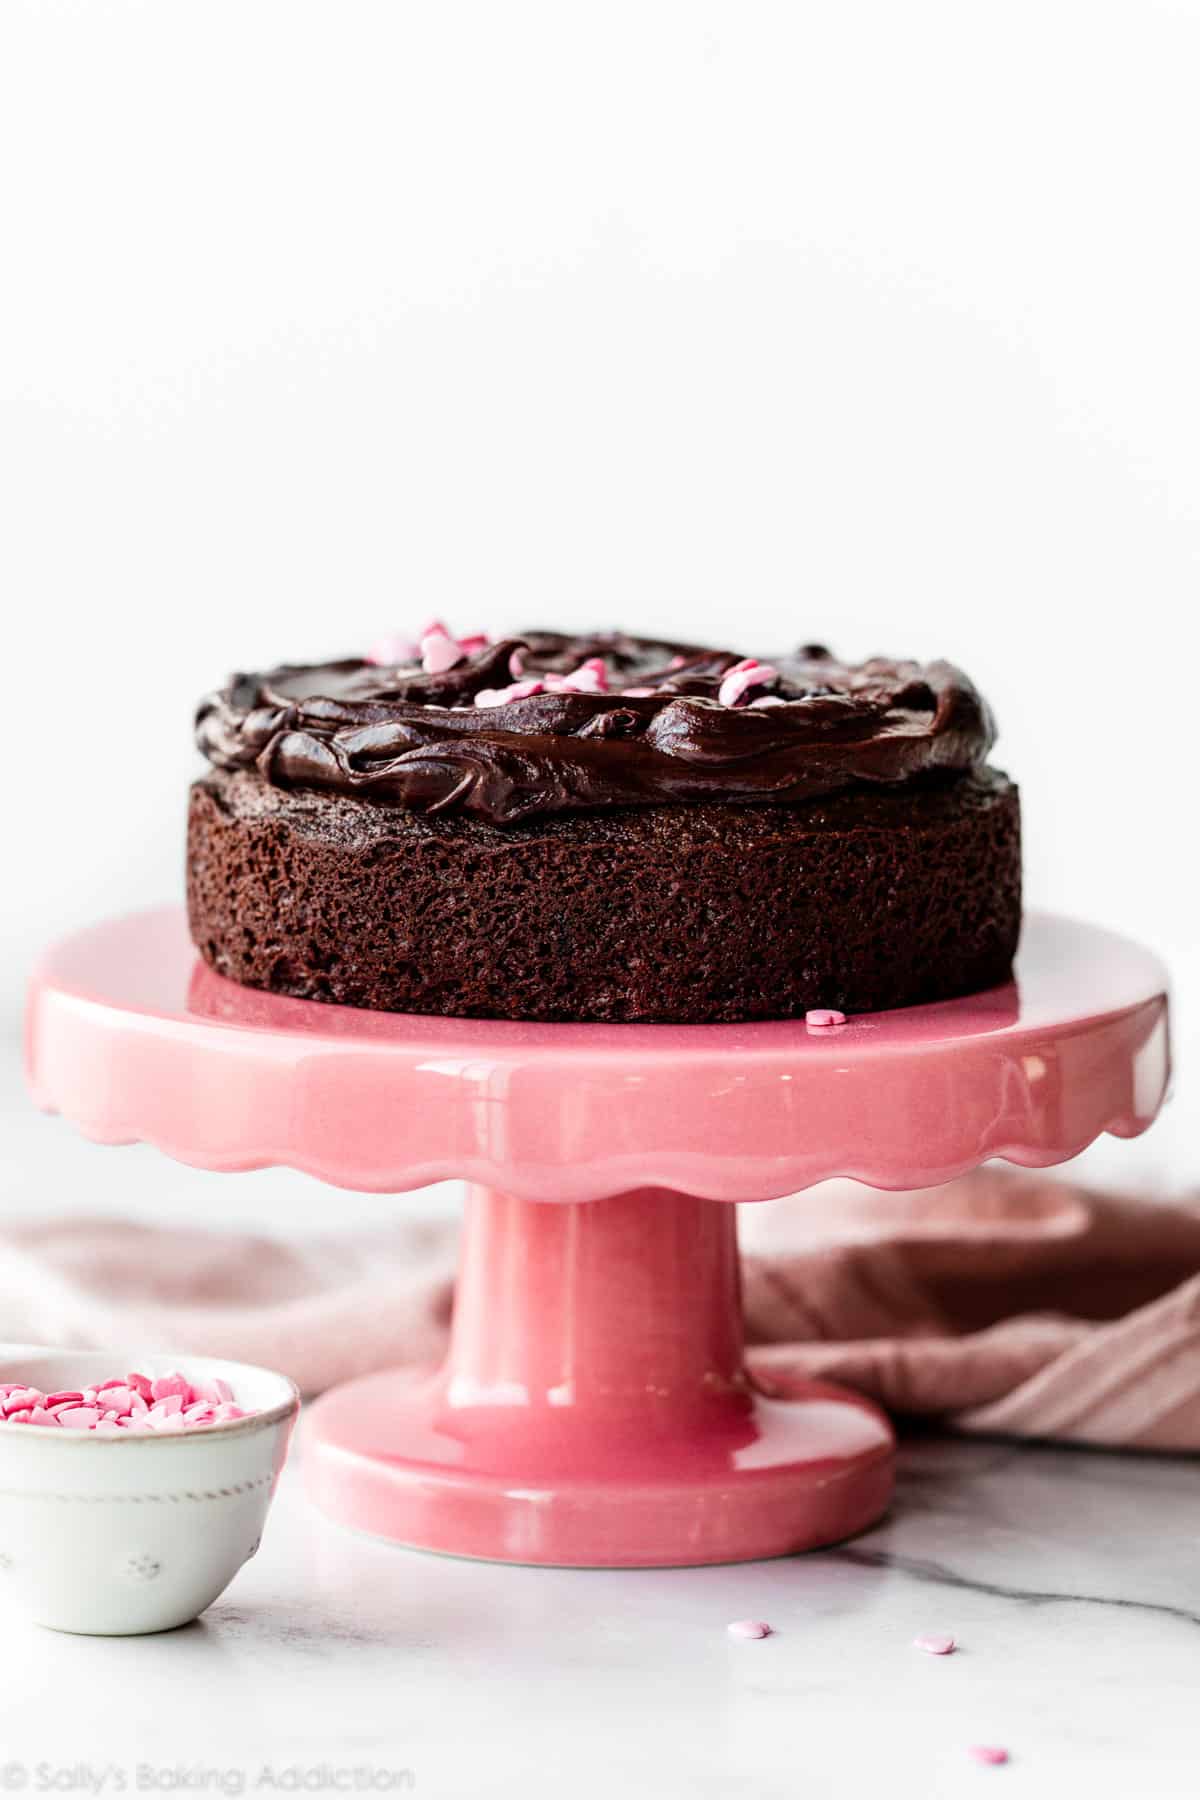 6 inch chocolate cake with chocolate ganache on top sitting on a pink cake stand